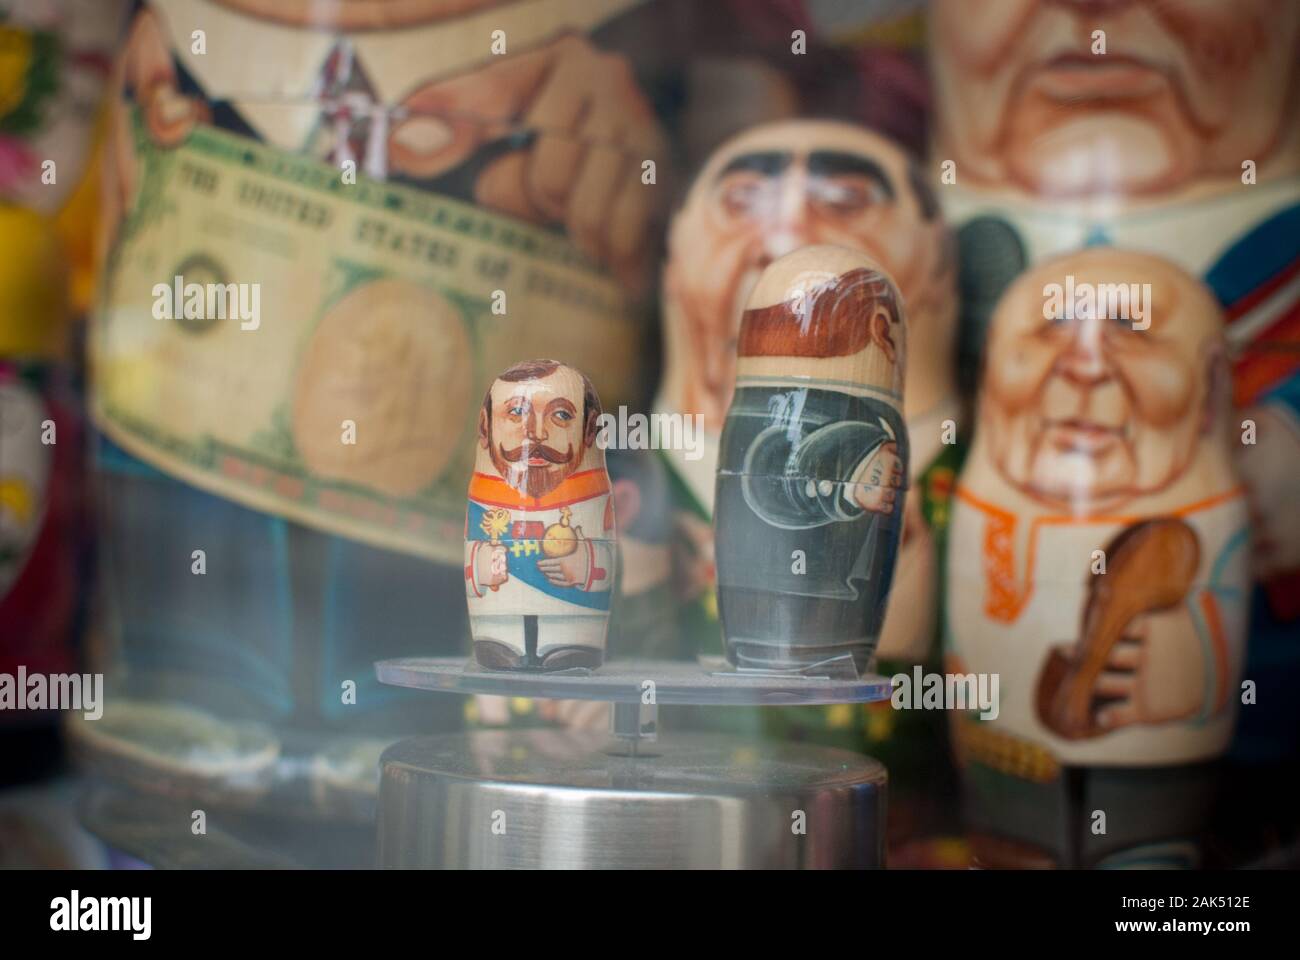 Russian dolls of politicians and men of power photographed through a store window Stock Photo